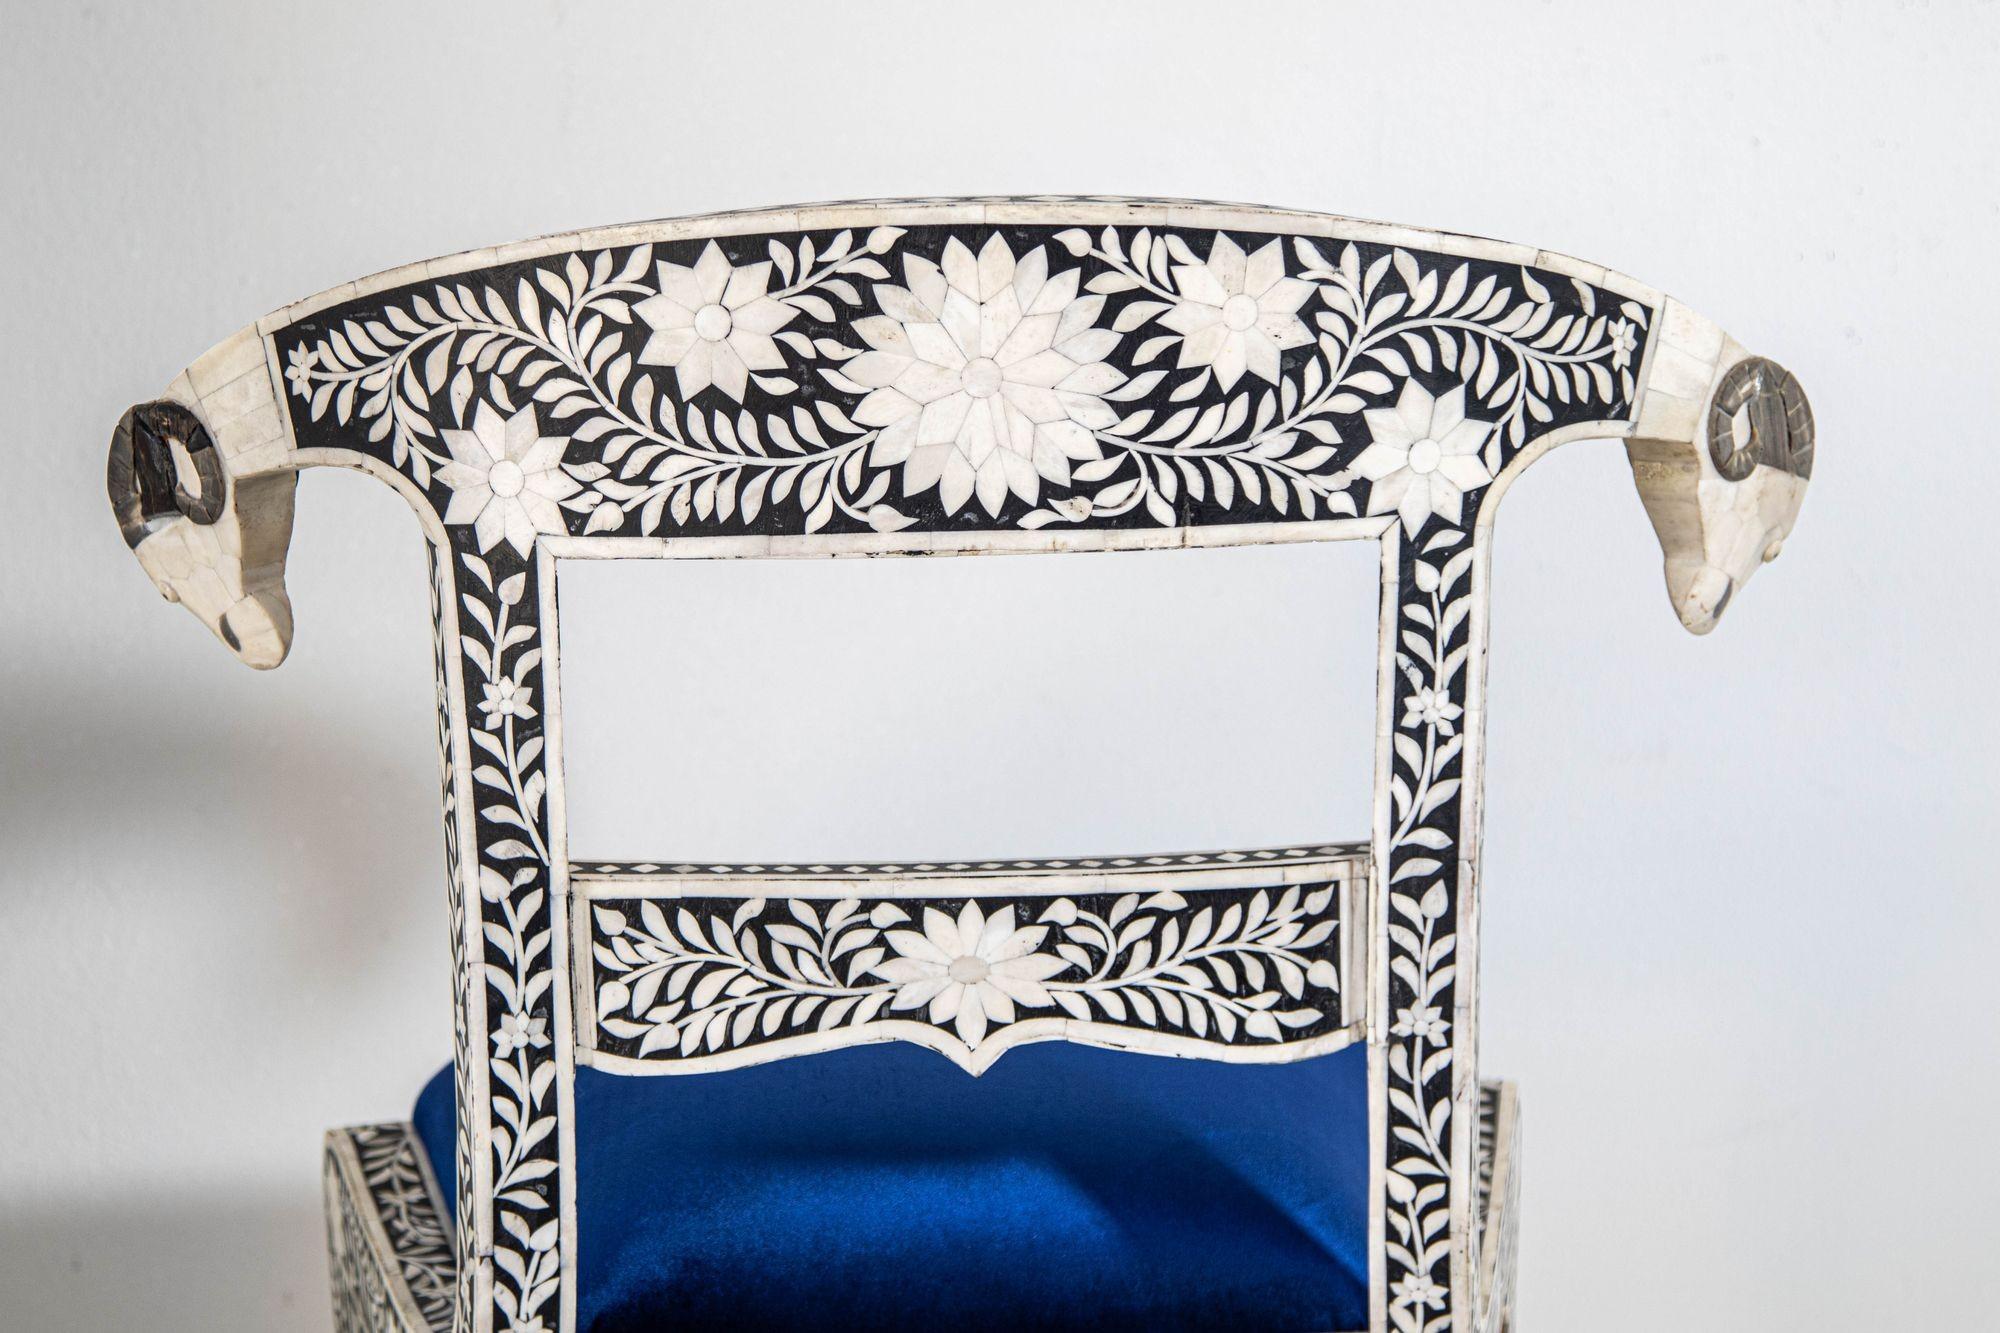 Antique Anglo-Indian Side Chairs with Ram's Head Bone Inlay Royal Blue Seat Pair For Sale 6